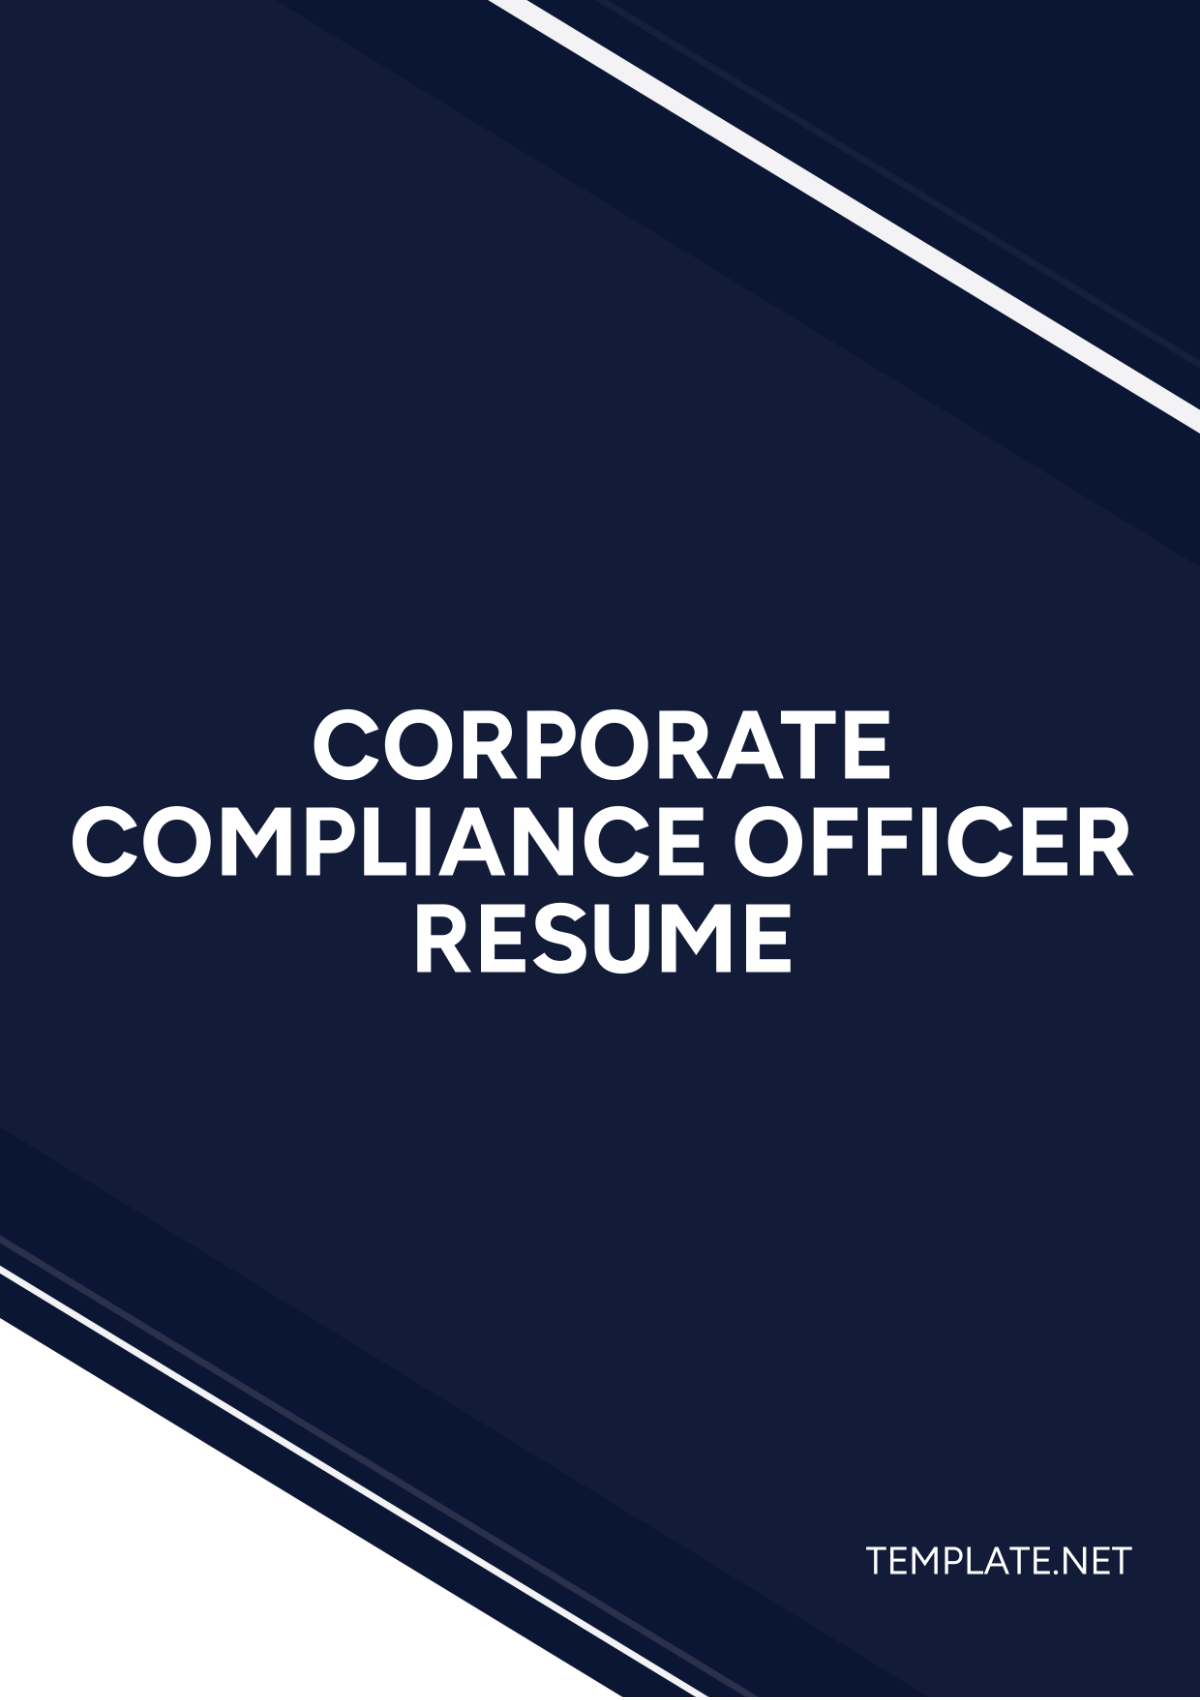 Corporate Compliance Officer Resume Template